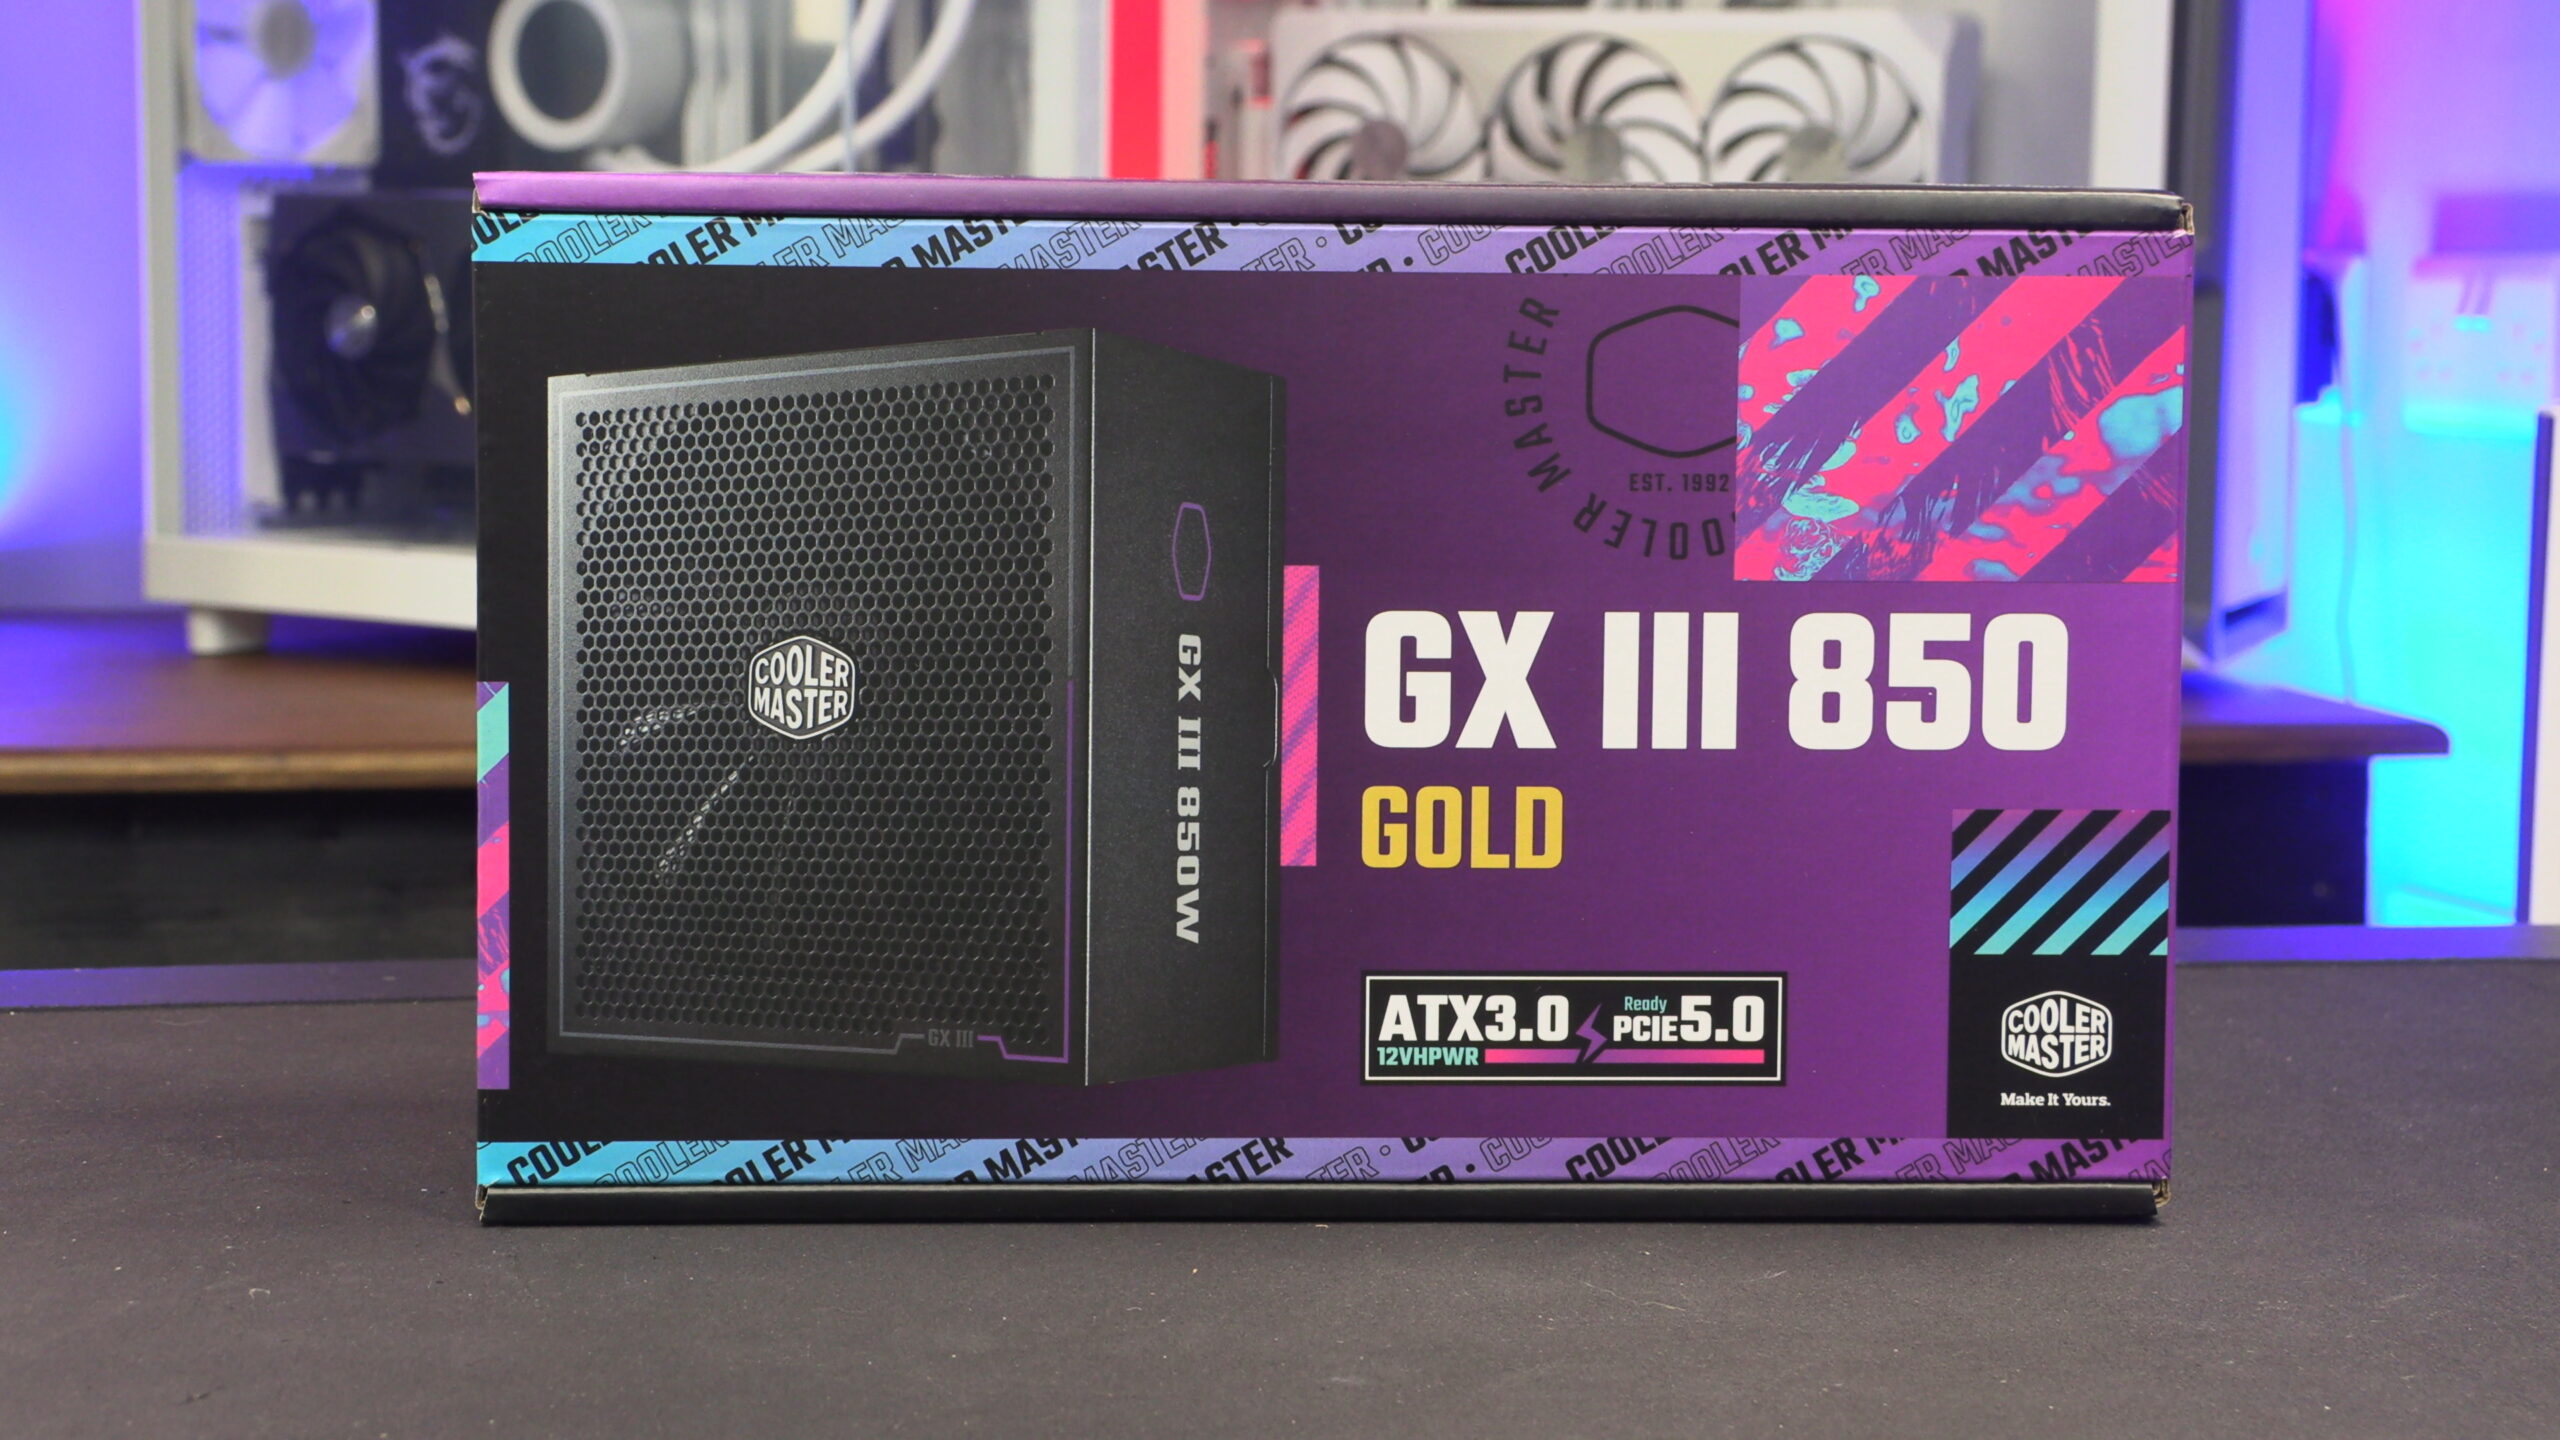 Cooler Master GX III 850 Gold 850W PSU Review